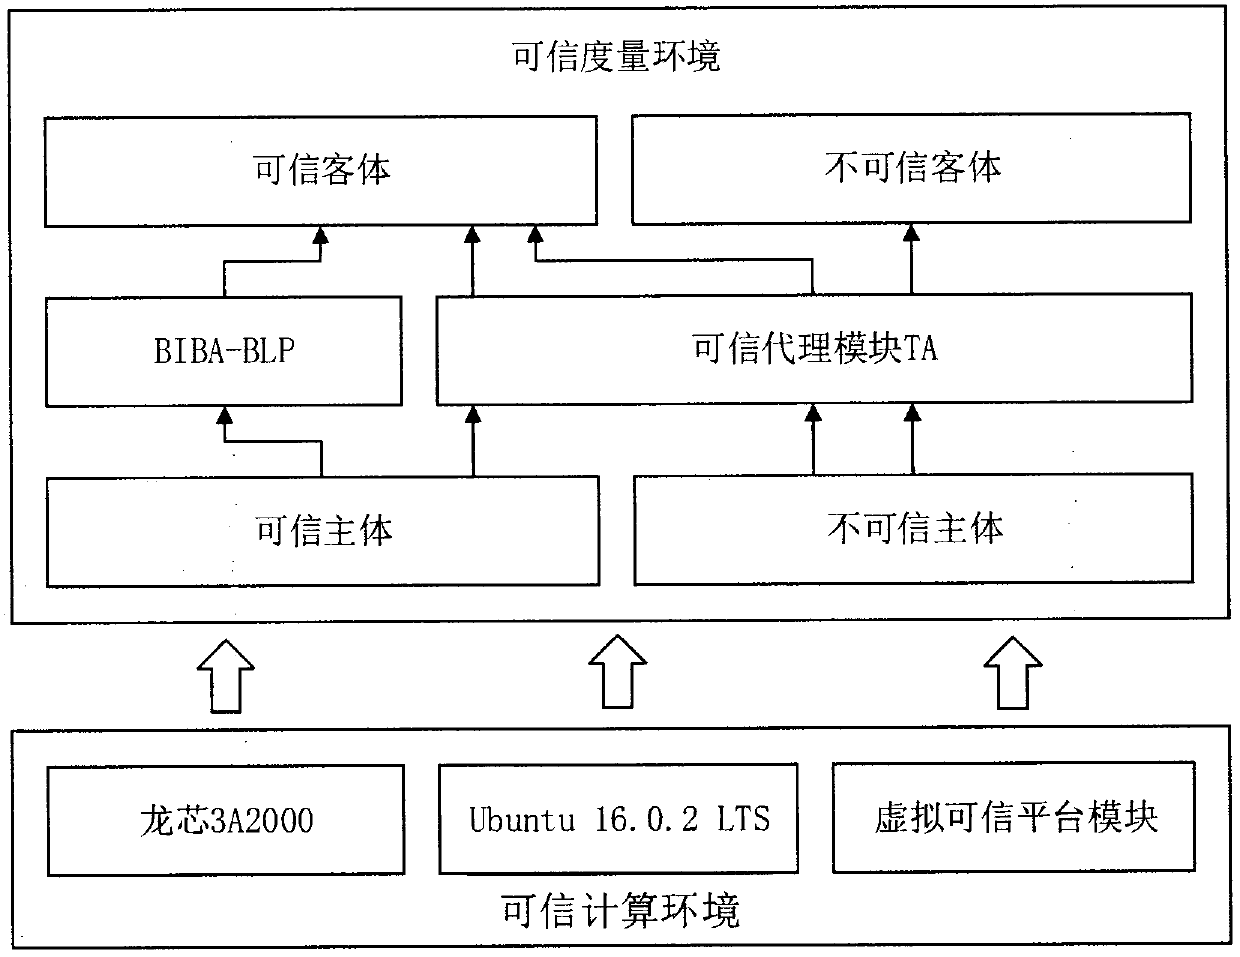 Multilevel security access control model based on information flow